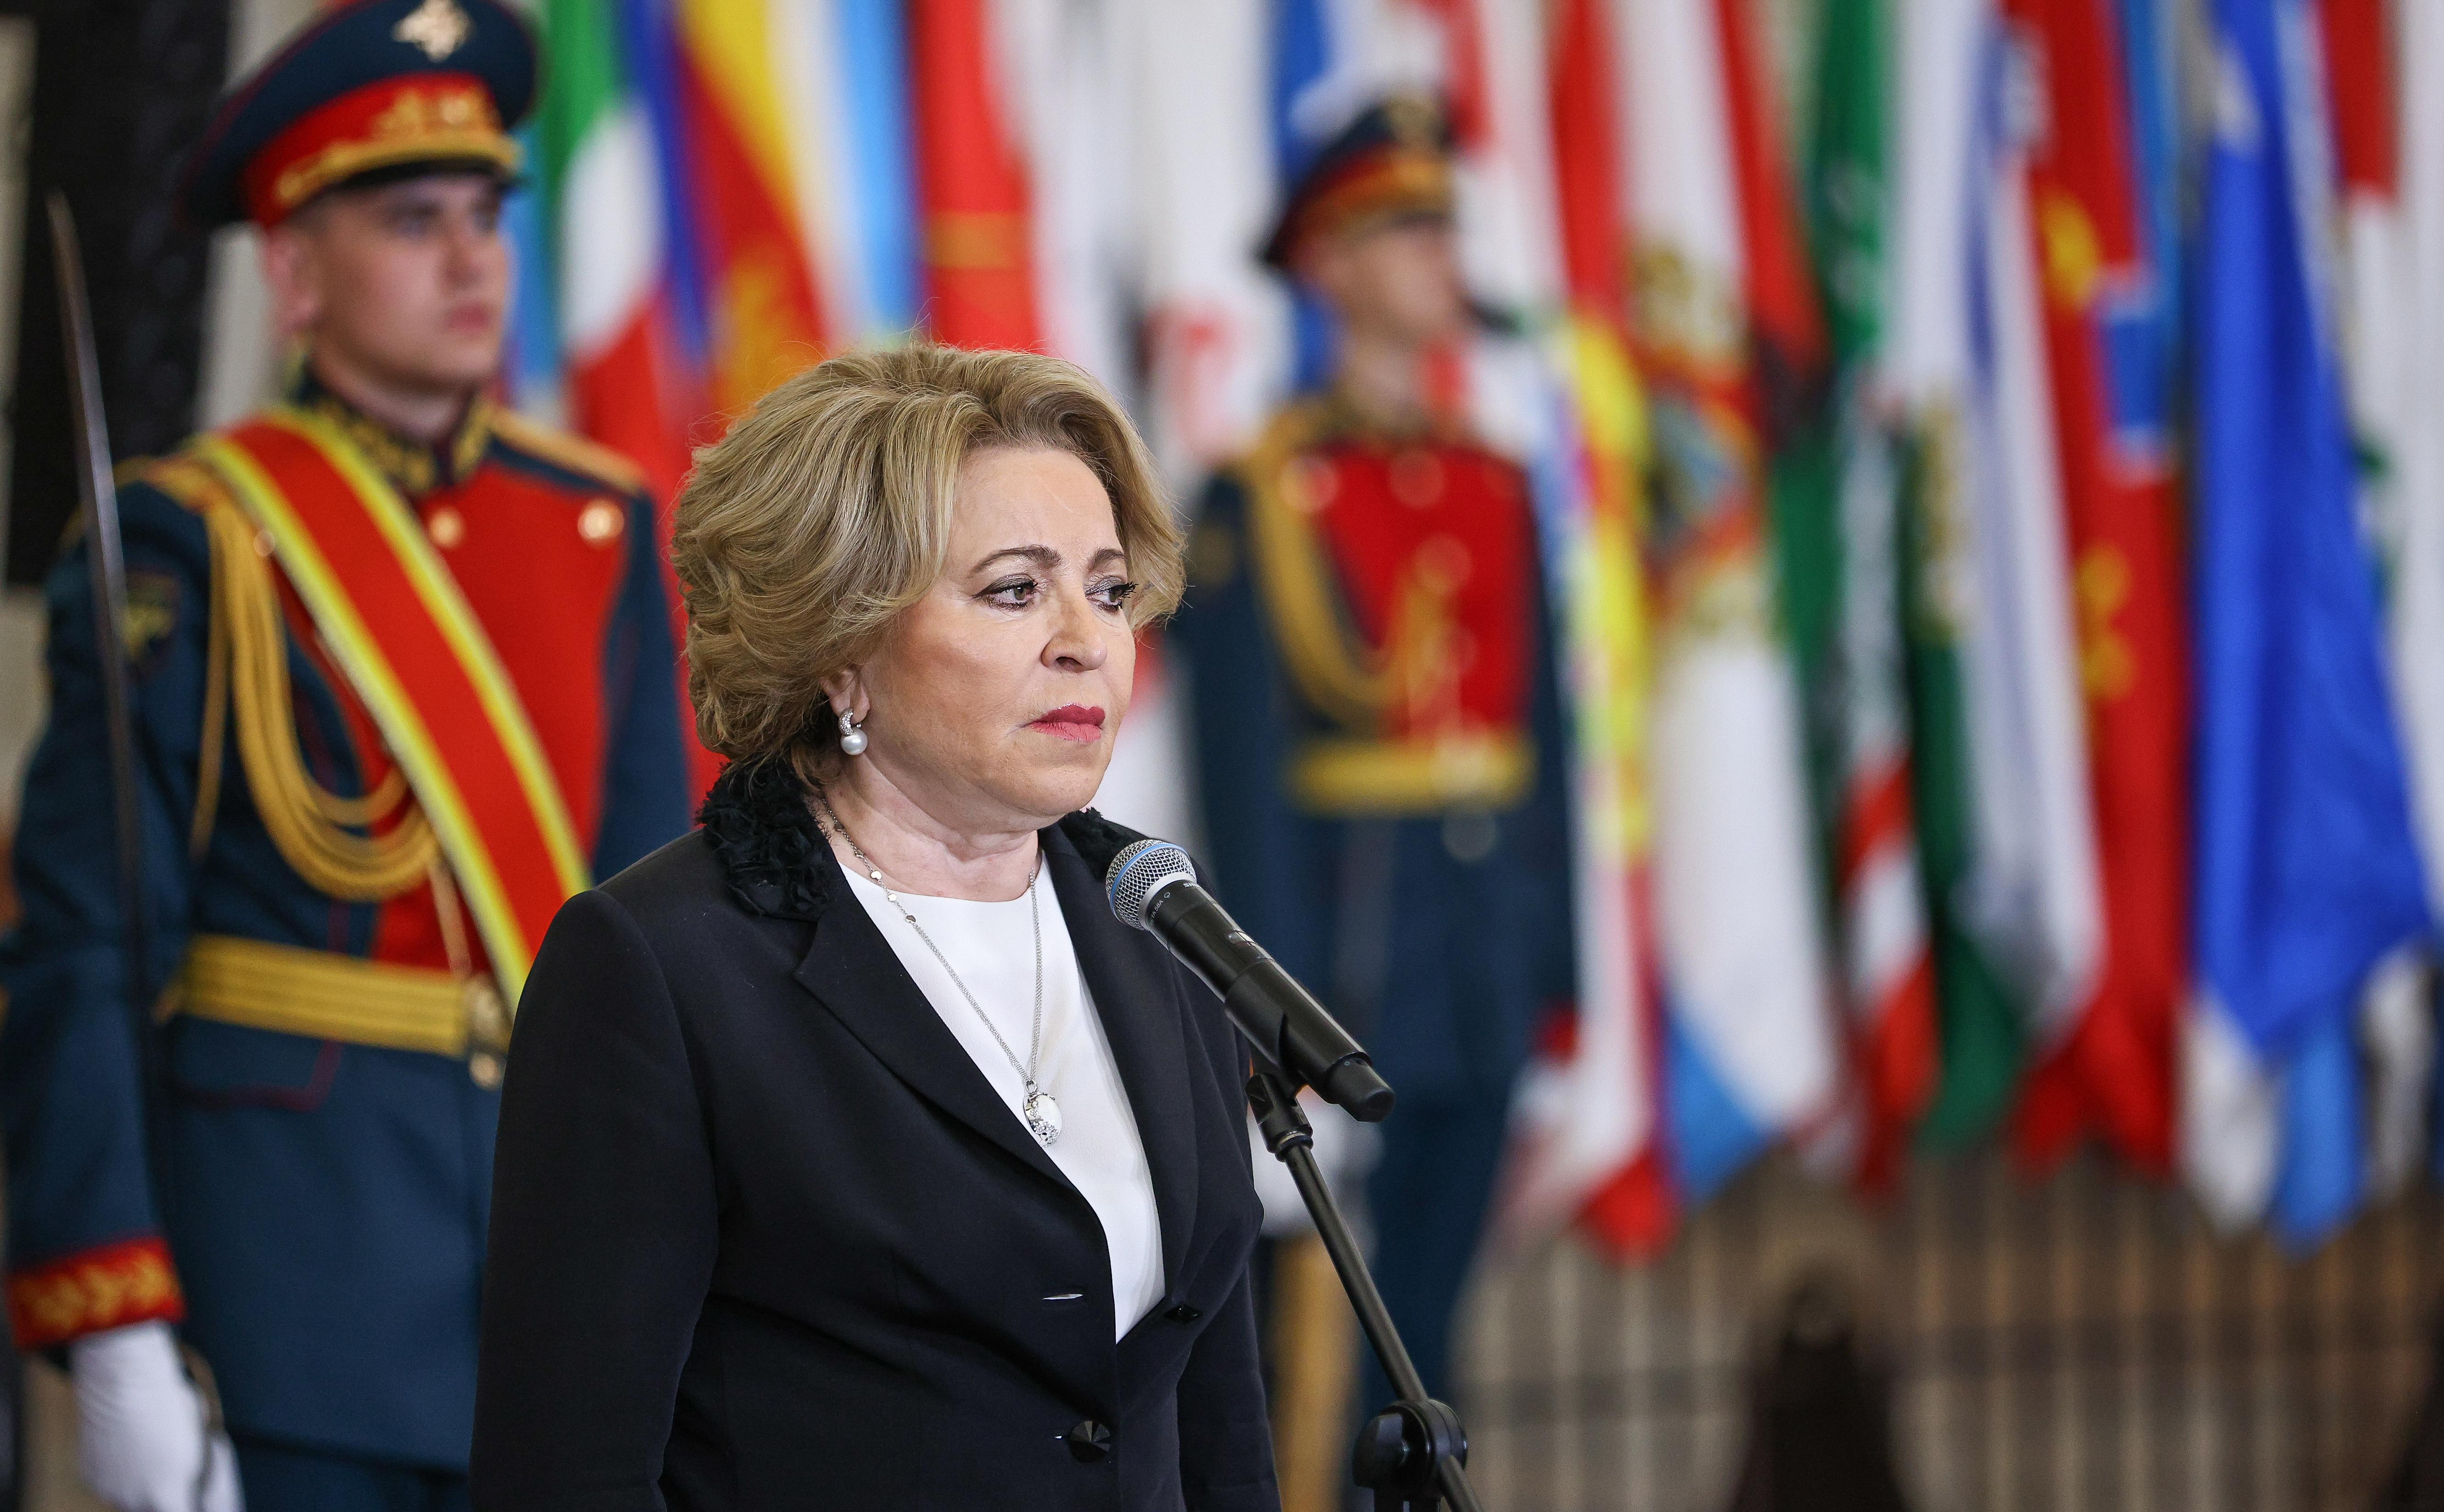 Matviyenko urged governors not to make mistakes during mobilization